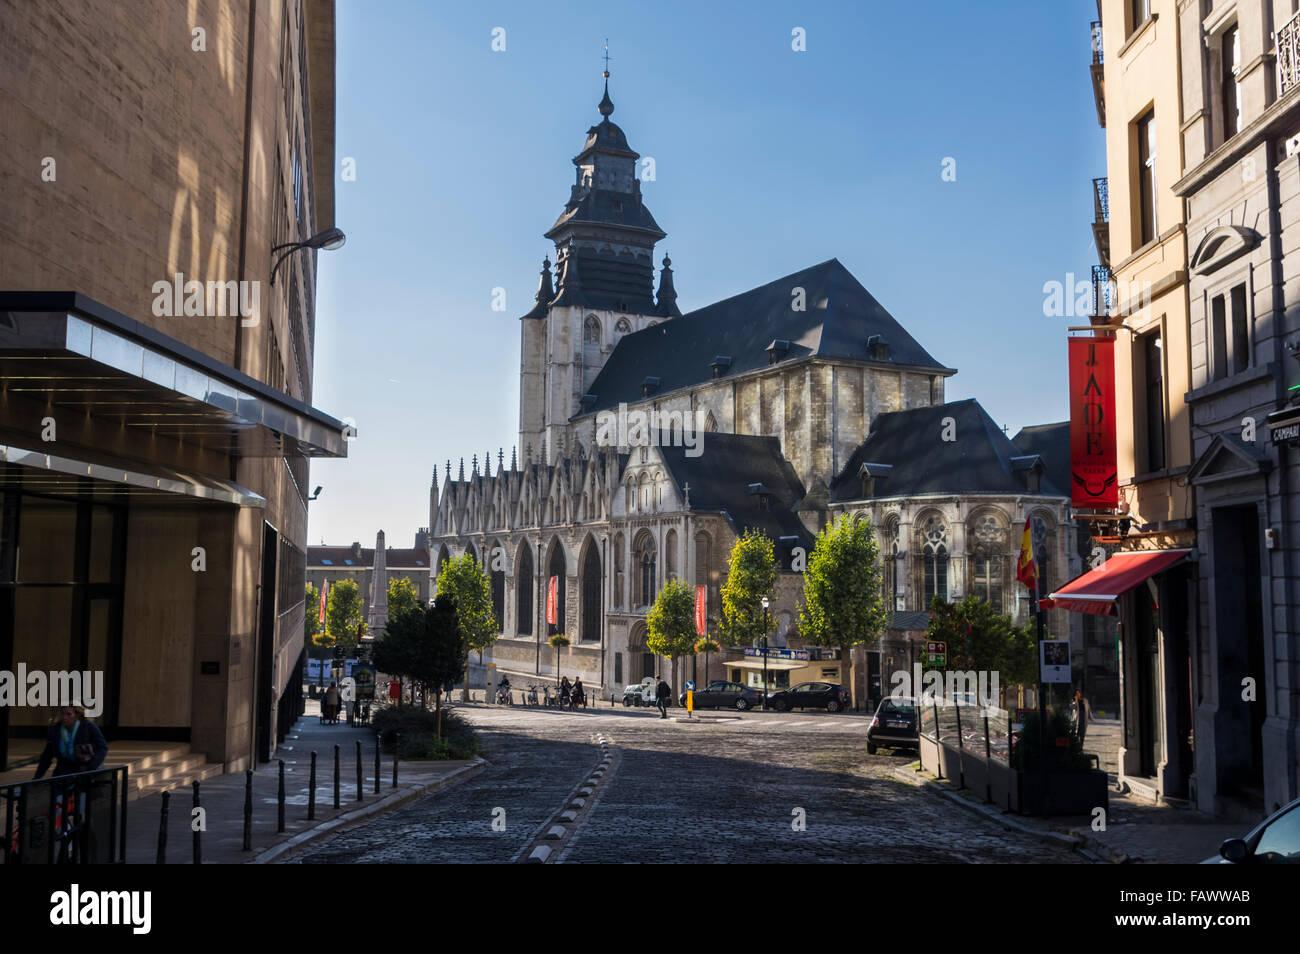 Église de la Chapelle or Kapellekerk, a Roman Catholic church built in gothic style with a baroque spire in Brussels, Belgium. Stock Photo